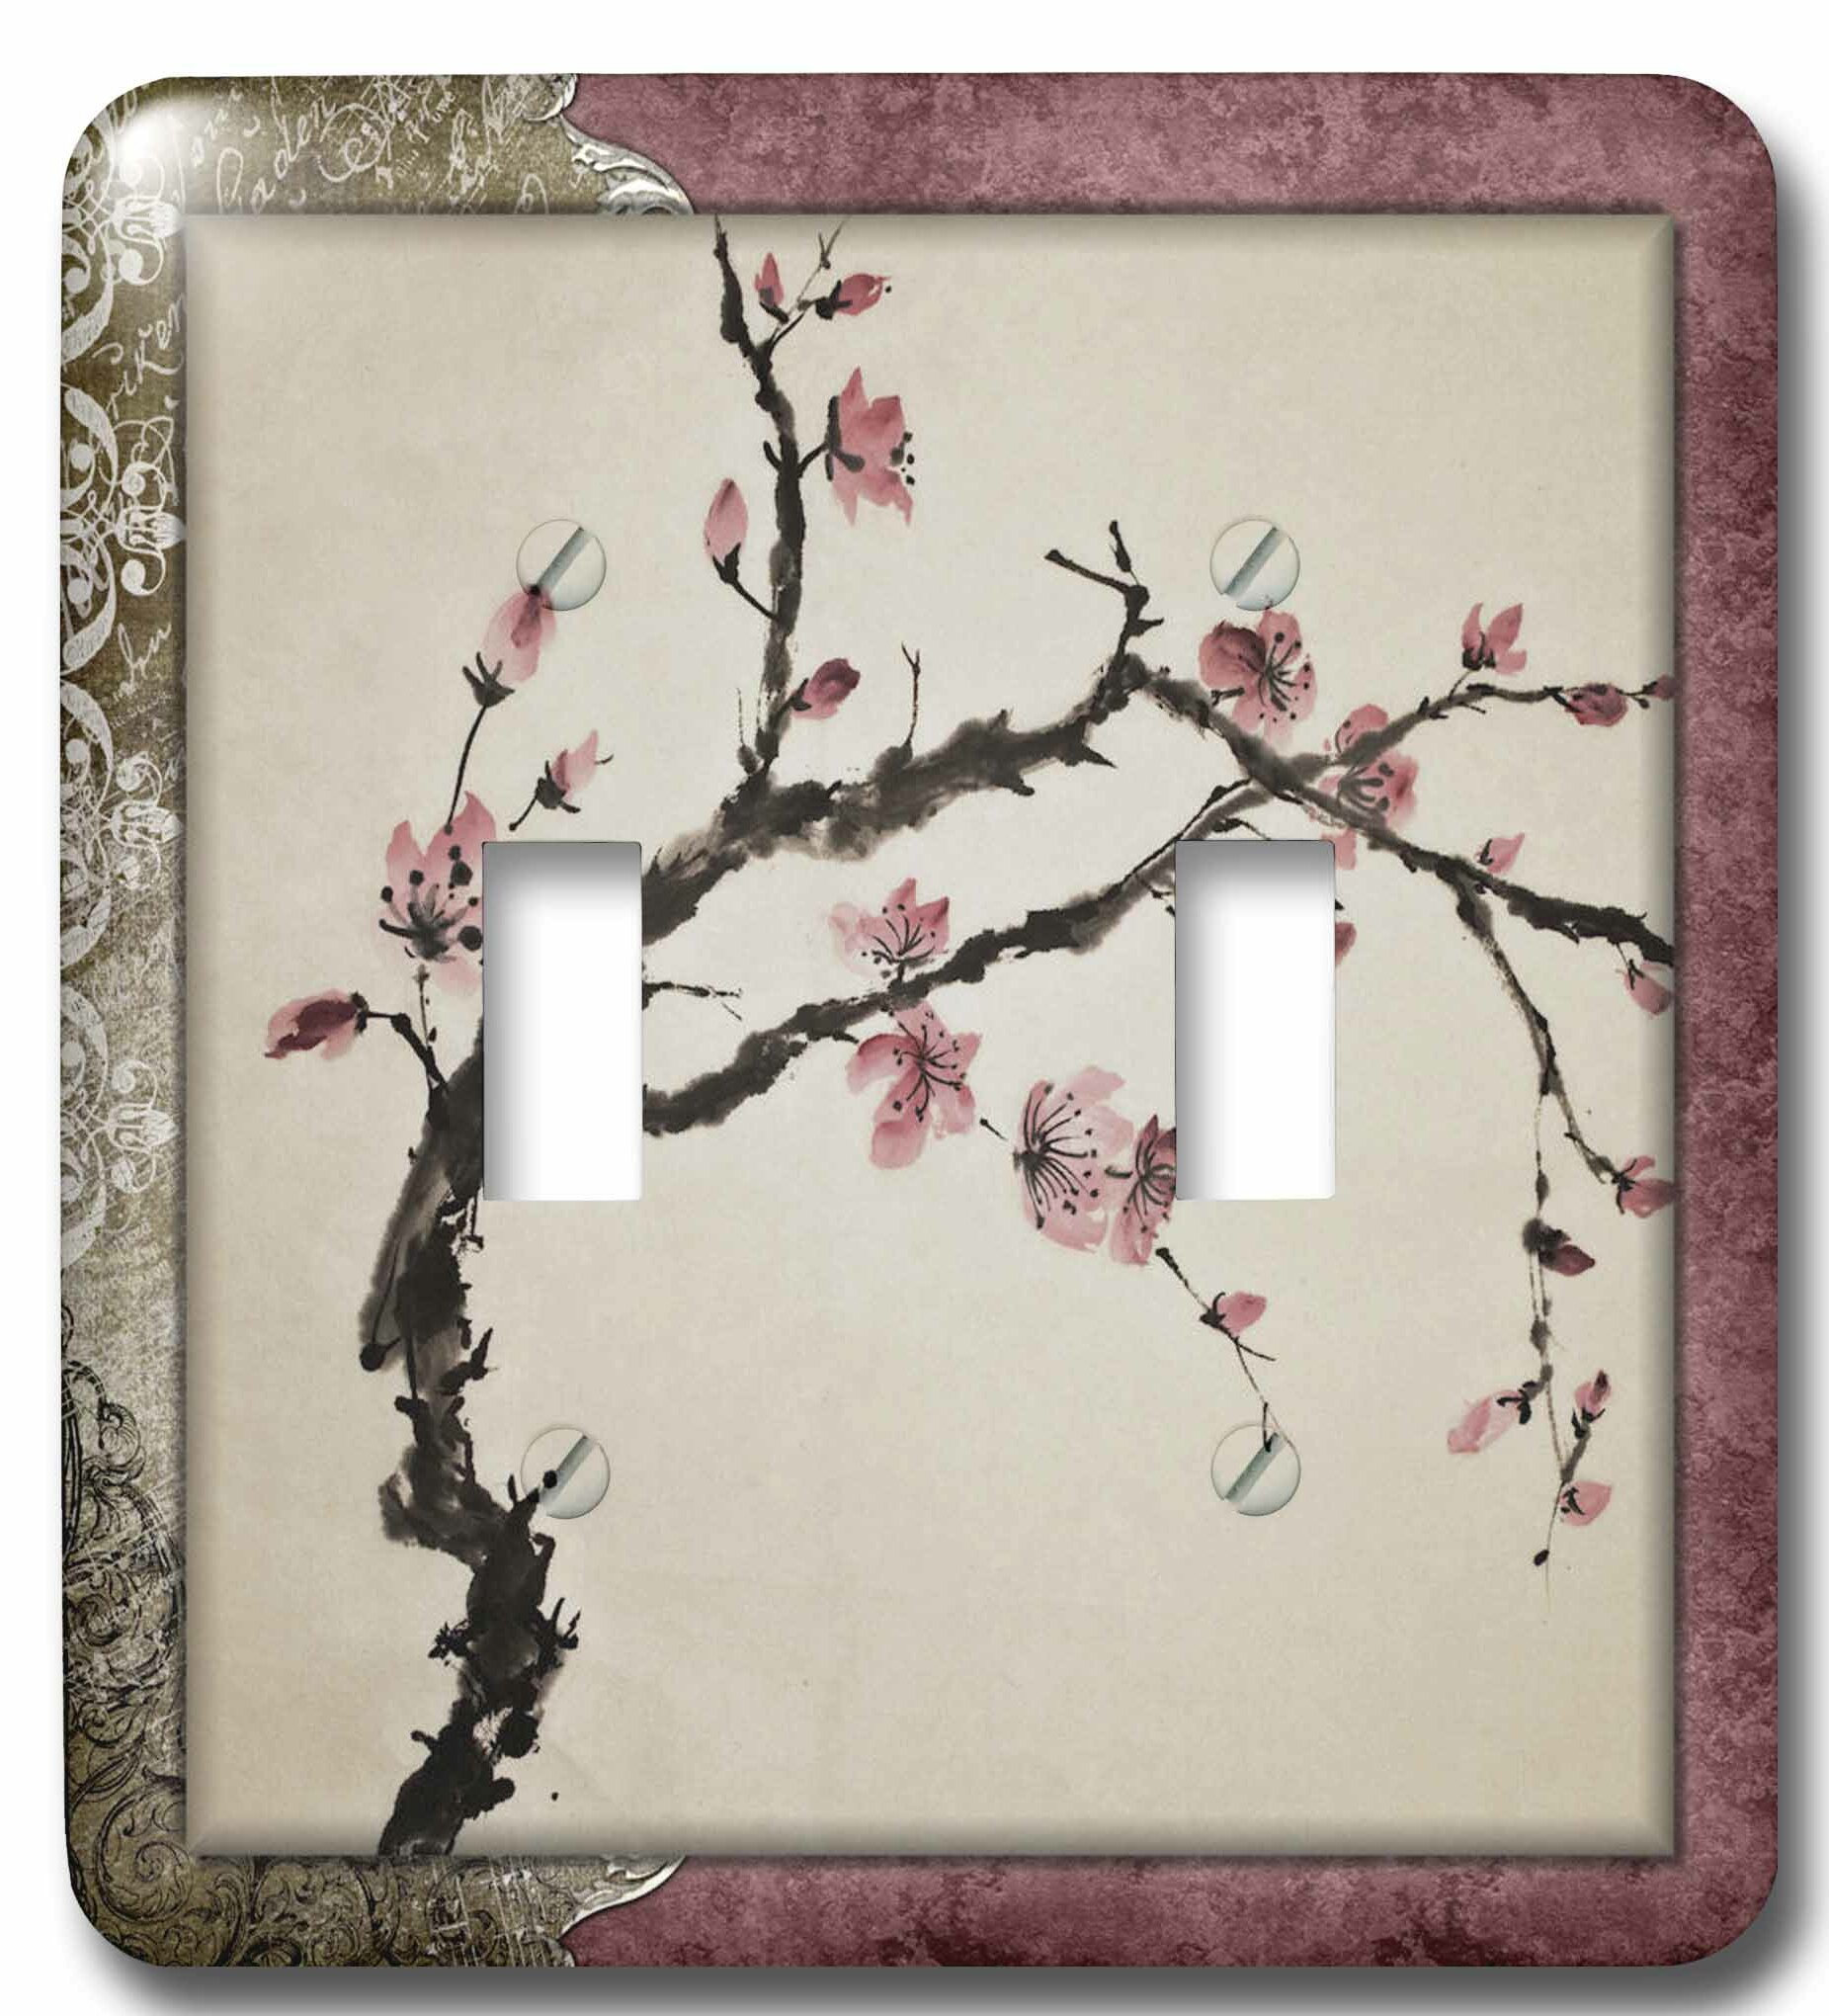 Switch Plate Cover Light Switch Wall Plate for Bedroom kitchen Home Decor Japanese Cherry Blossom With Pink Butterfly Wall Plate